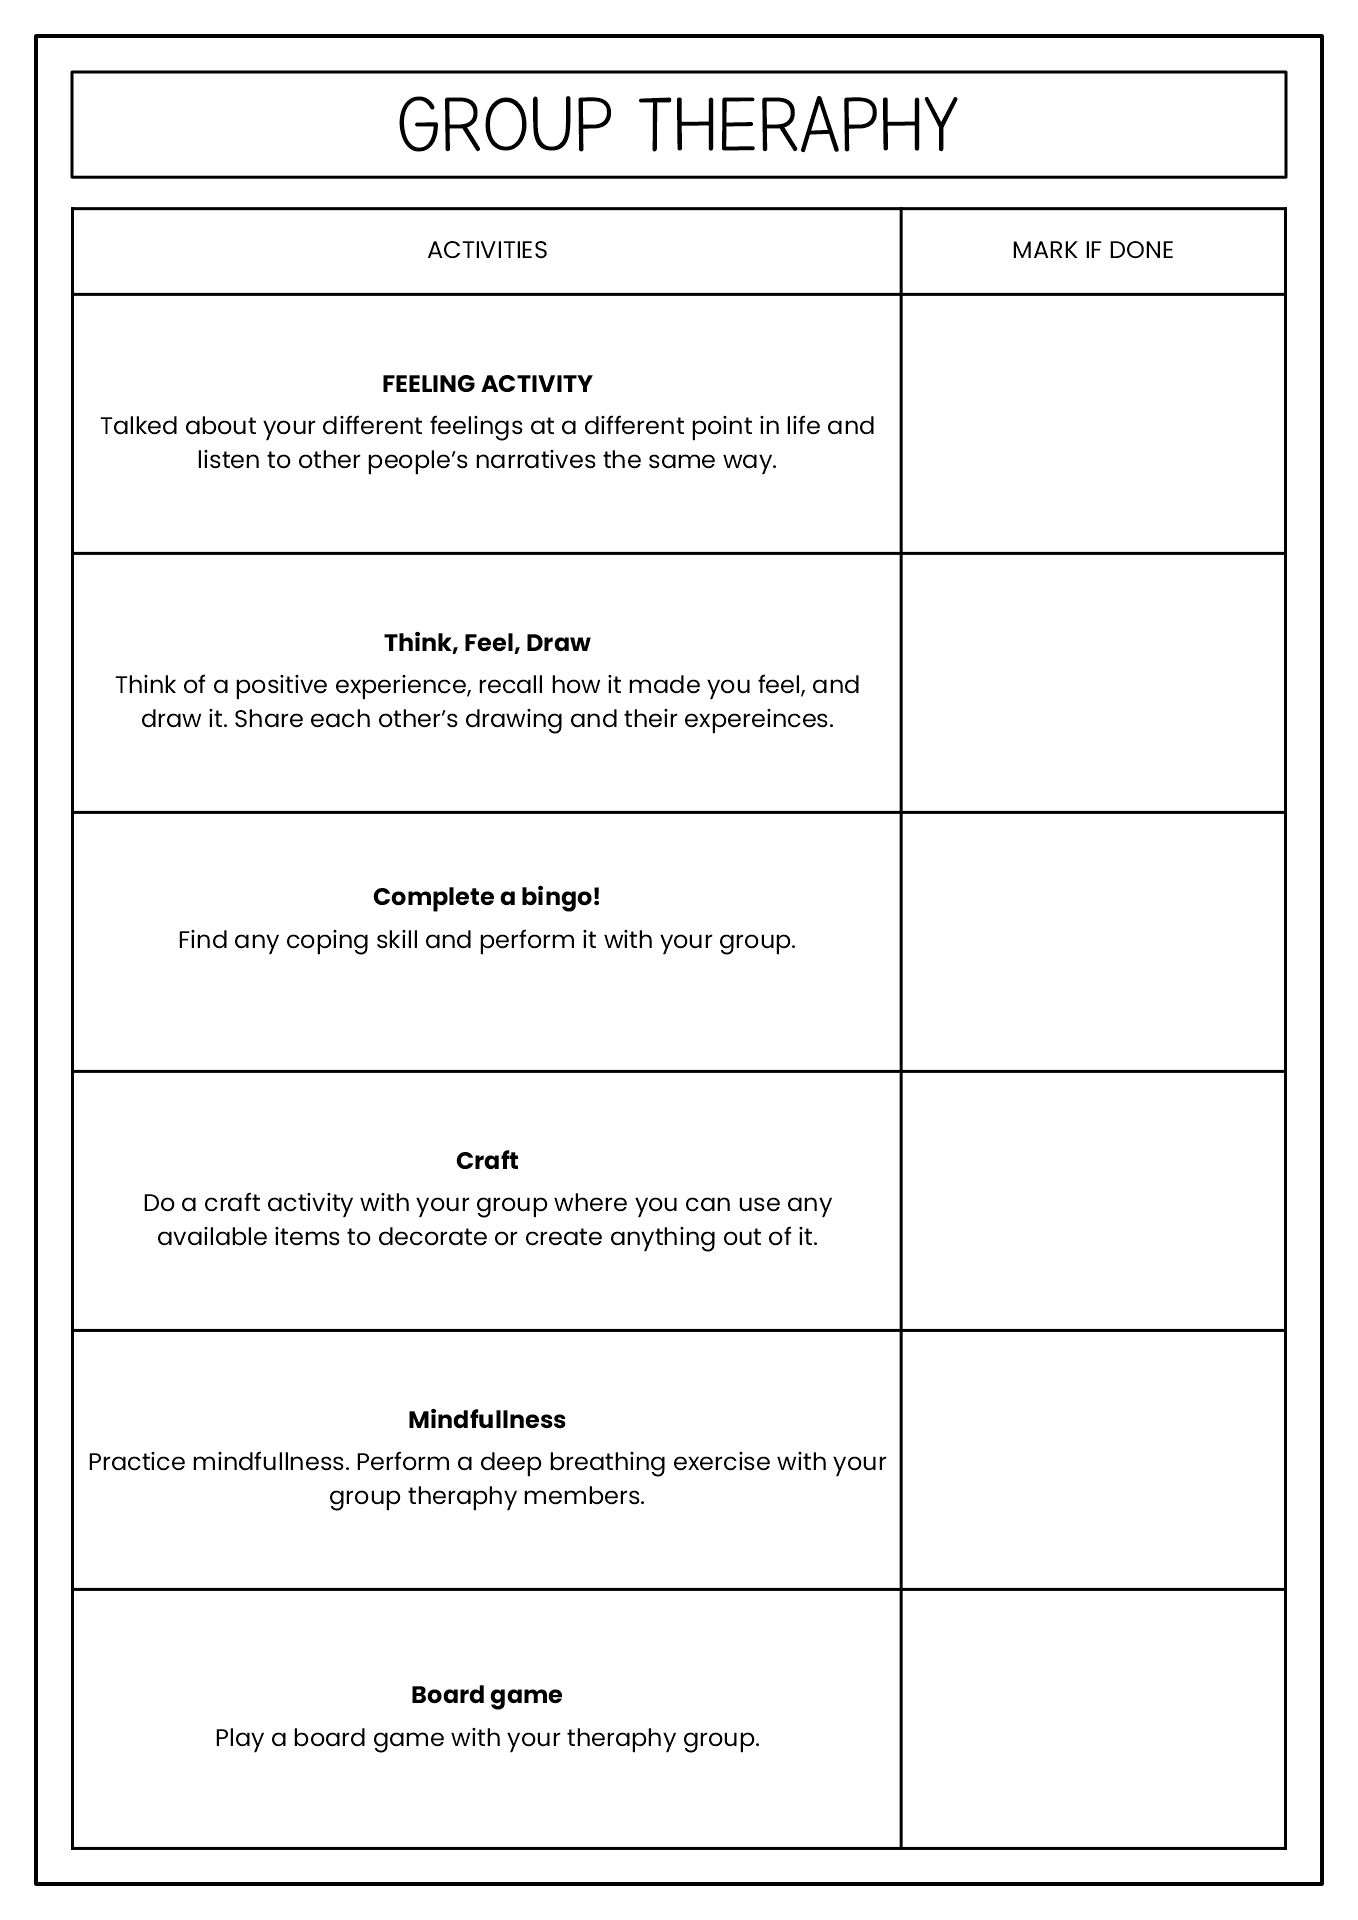 Mental Health Group Therapy Worksheets Image